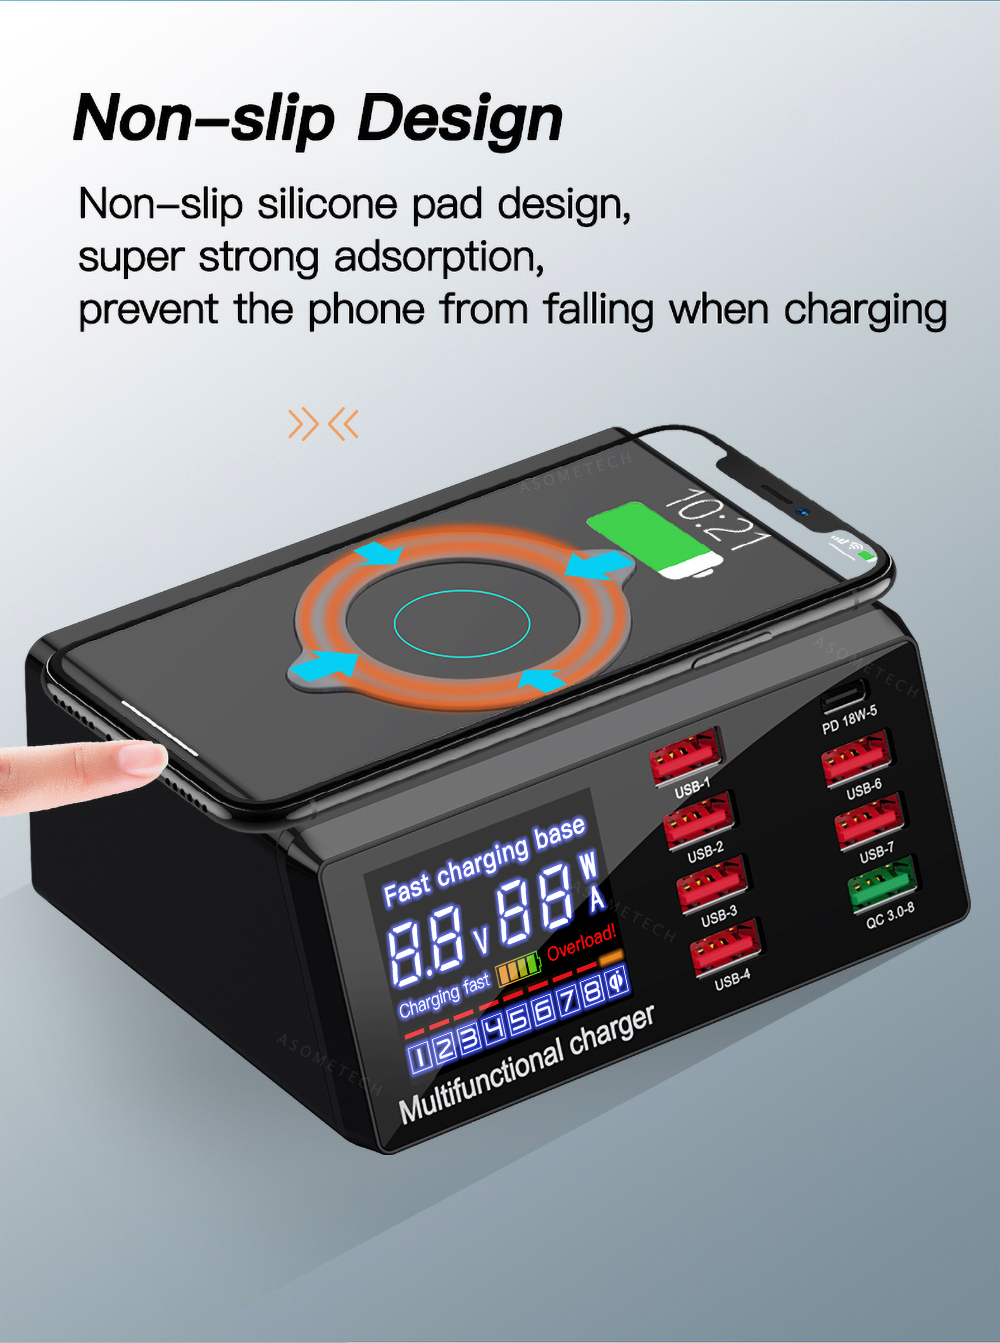 Bakeey-100W-8-Port-USB-PD-Charger-PD30-QC30-Desktop-Charging-Station-Smart-Charger-10W-Wireless-Char-1716456-11